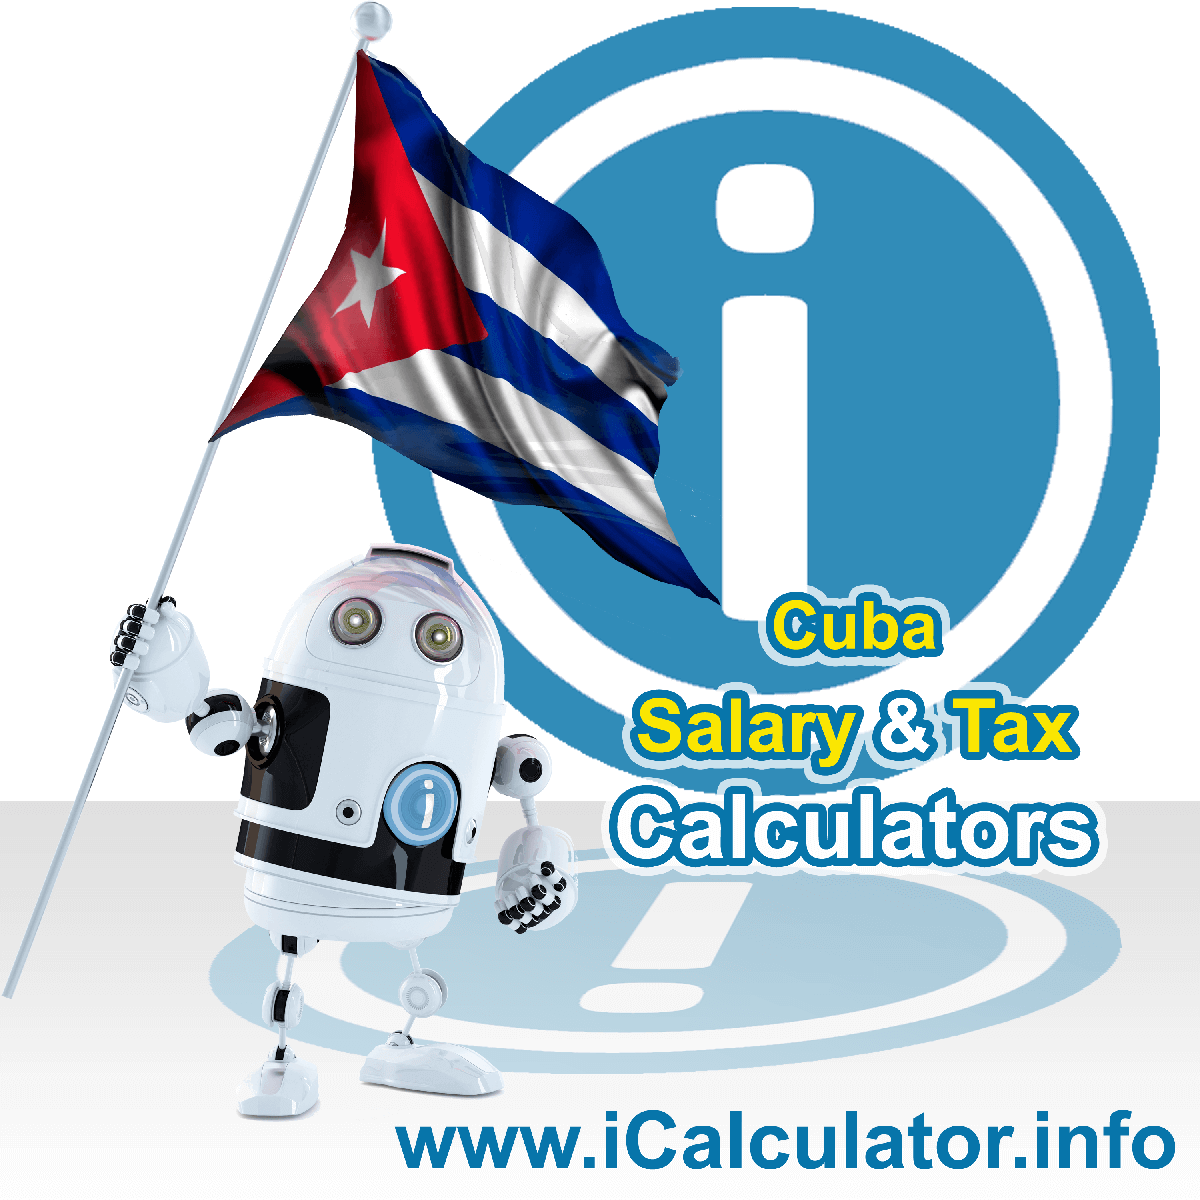 Cuba Wage Calculator. This image shows the Cuba flag and information relating to the tax formula for the Cuba Tax Calculator